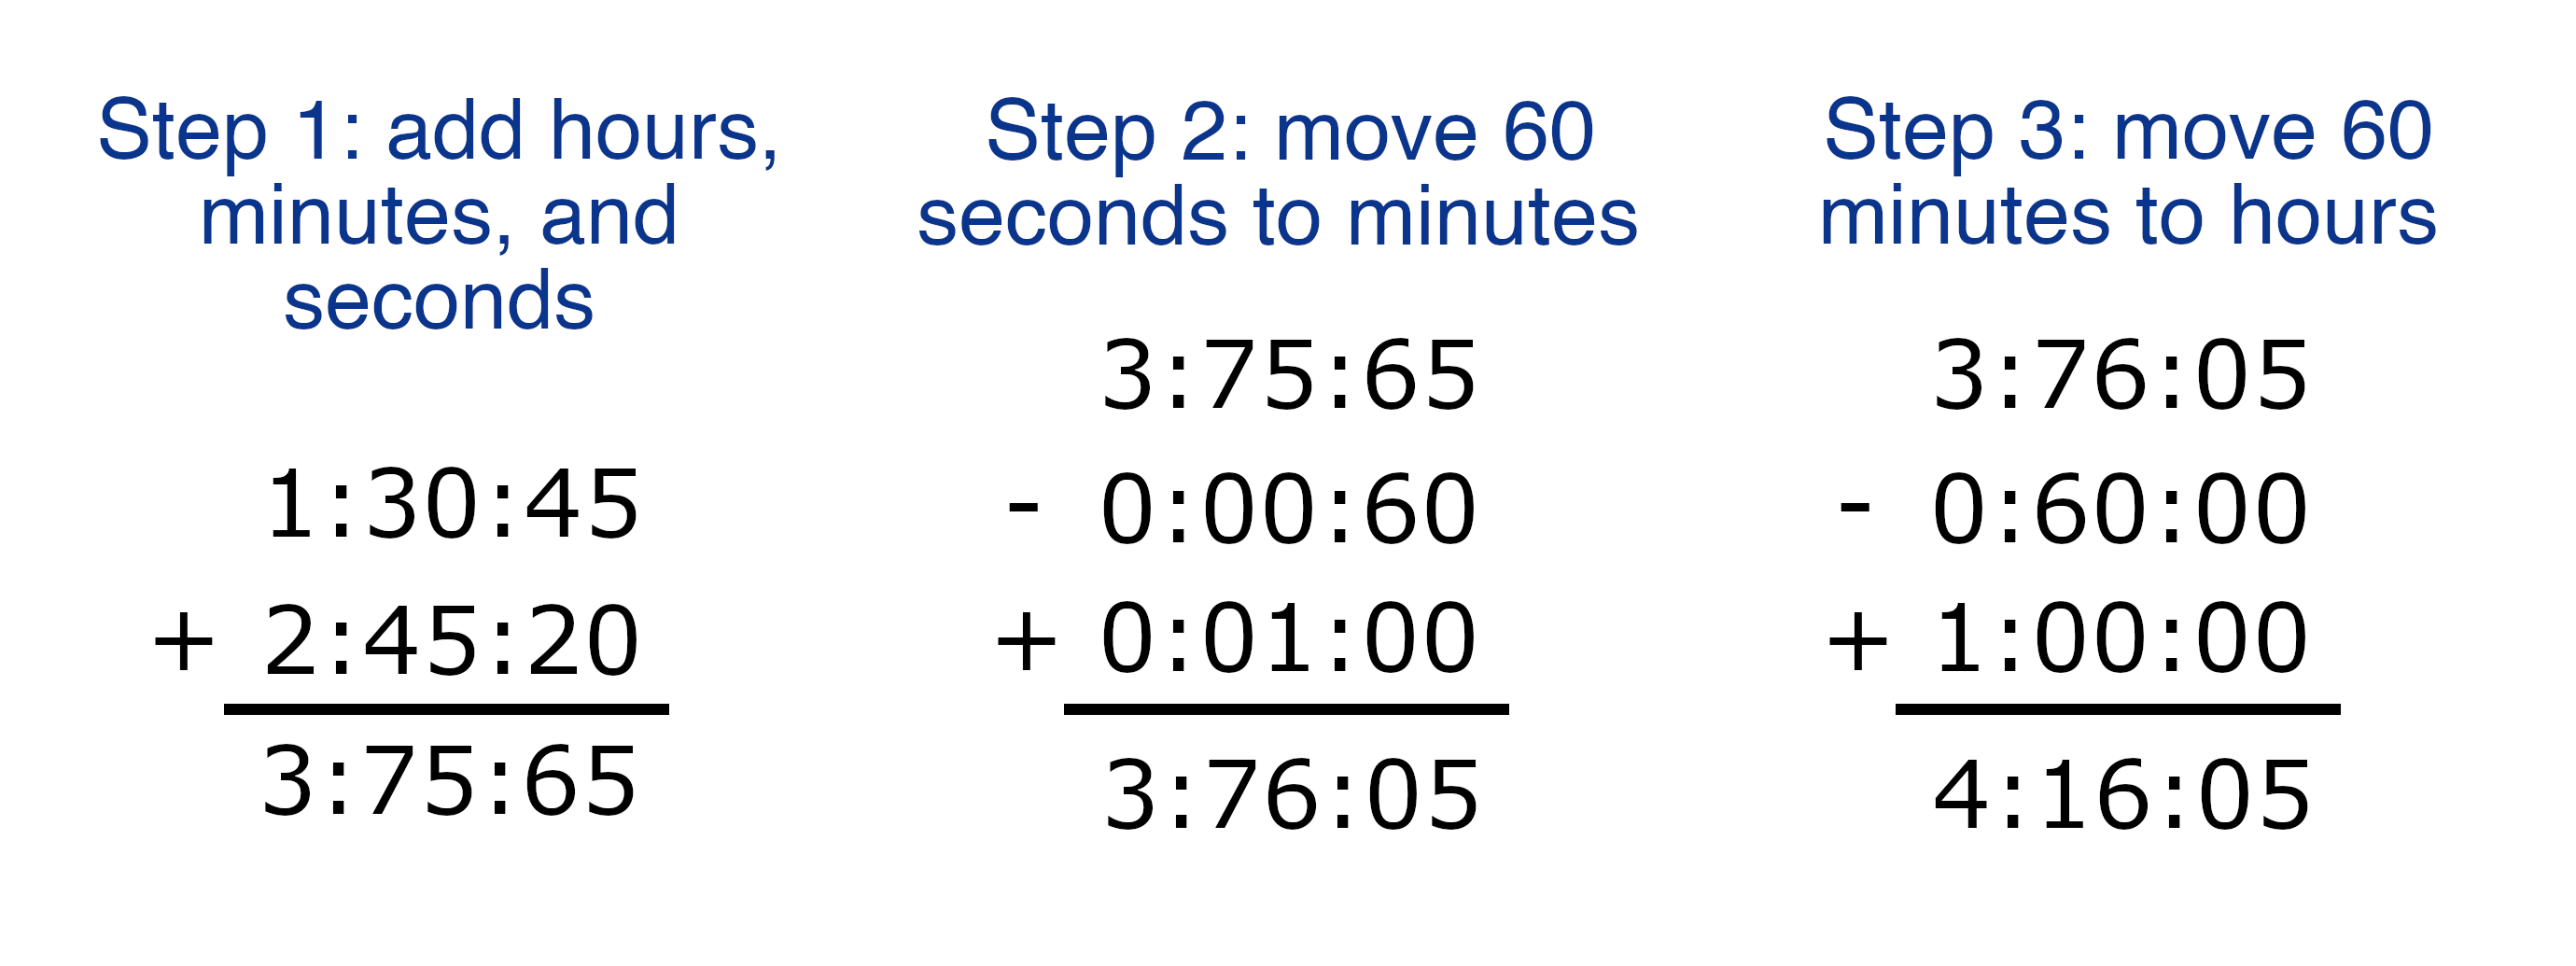 image showing the steps to add two time values together